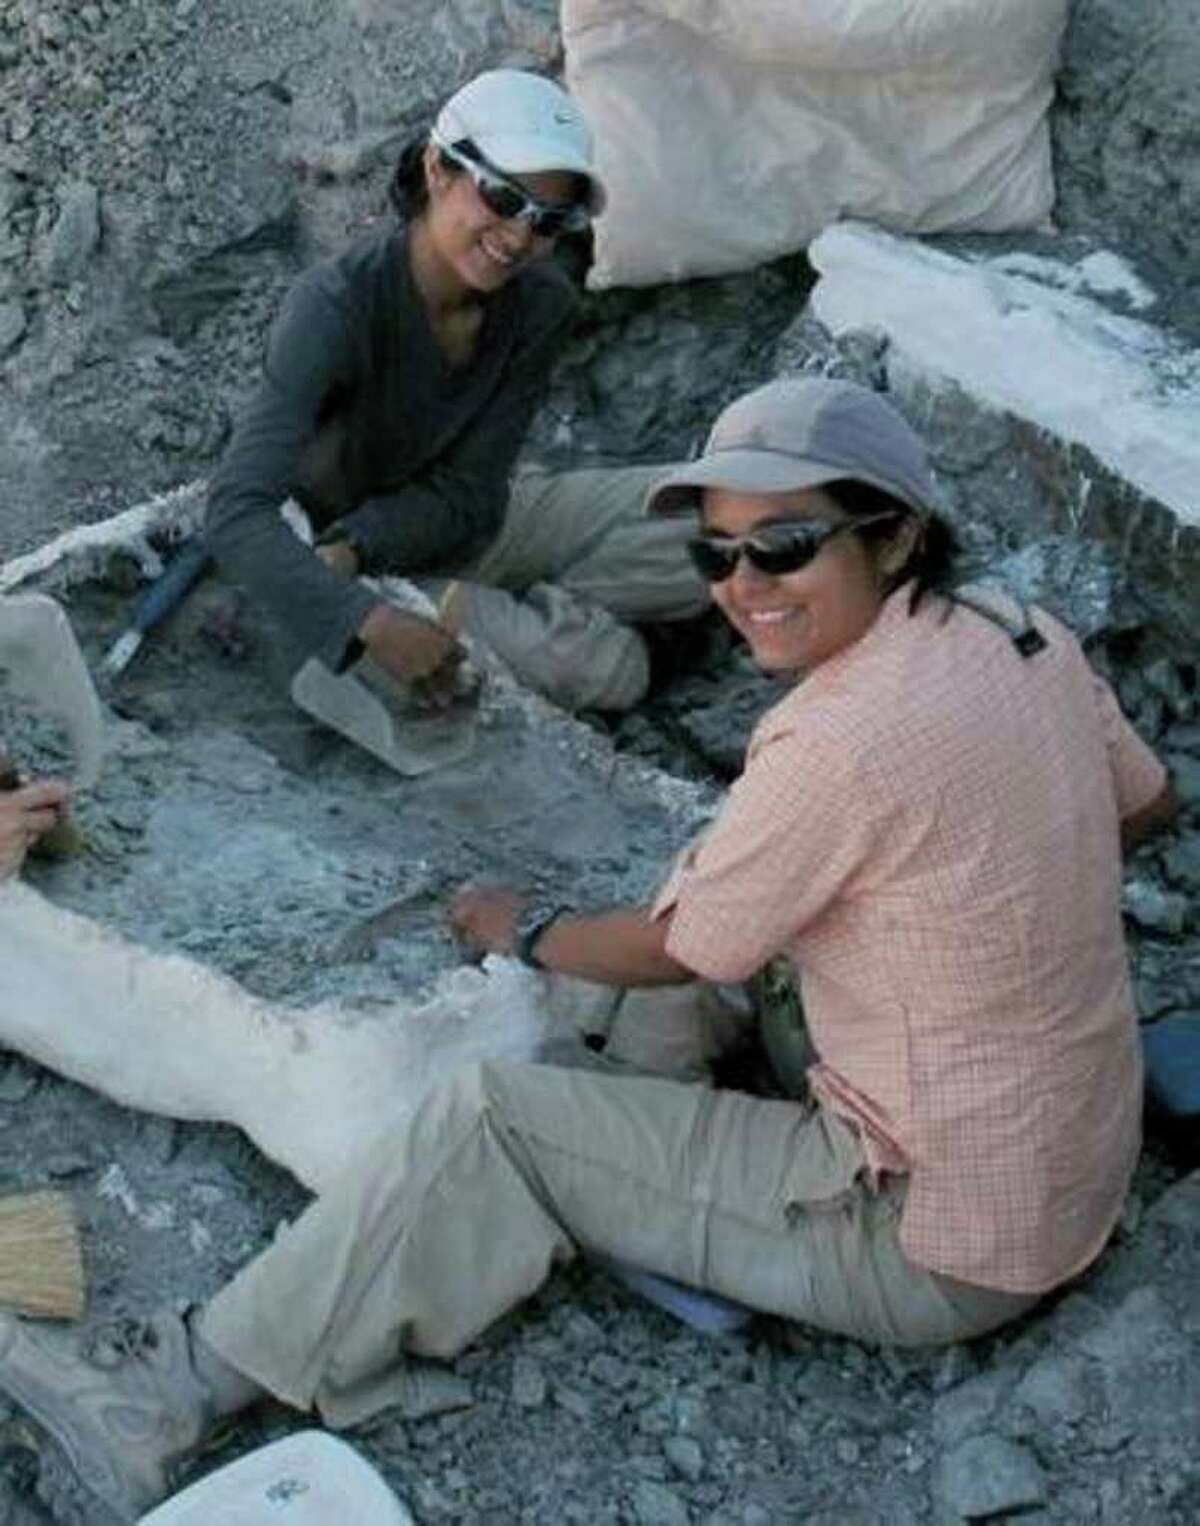 Celina (left) and Marina Suarez at the site of the dinosaur boneyard they discovered in Utah, where a new dinosaur species named after them, Geminiraptor suarezarum, was found. Courtesy photo.